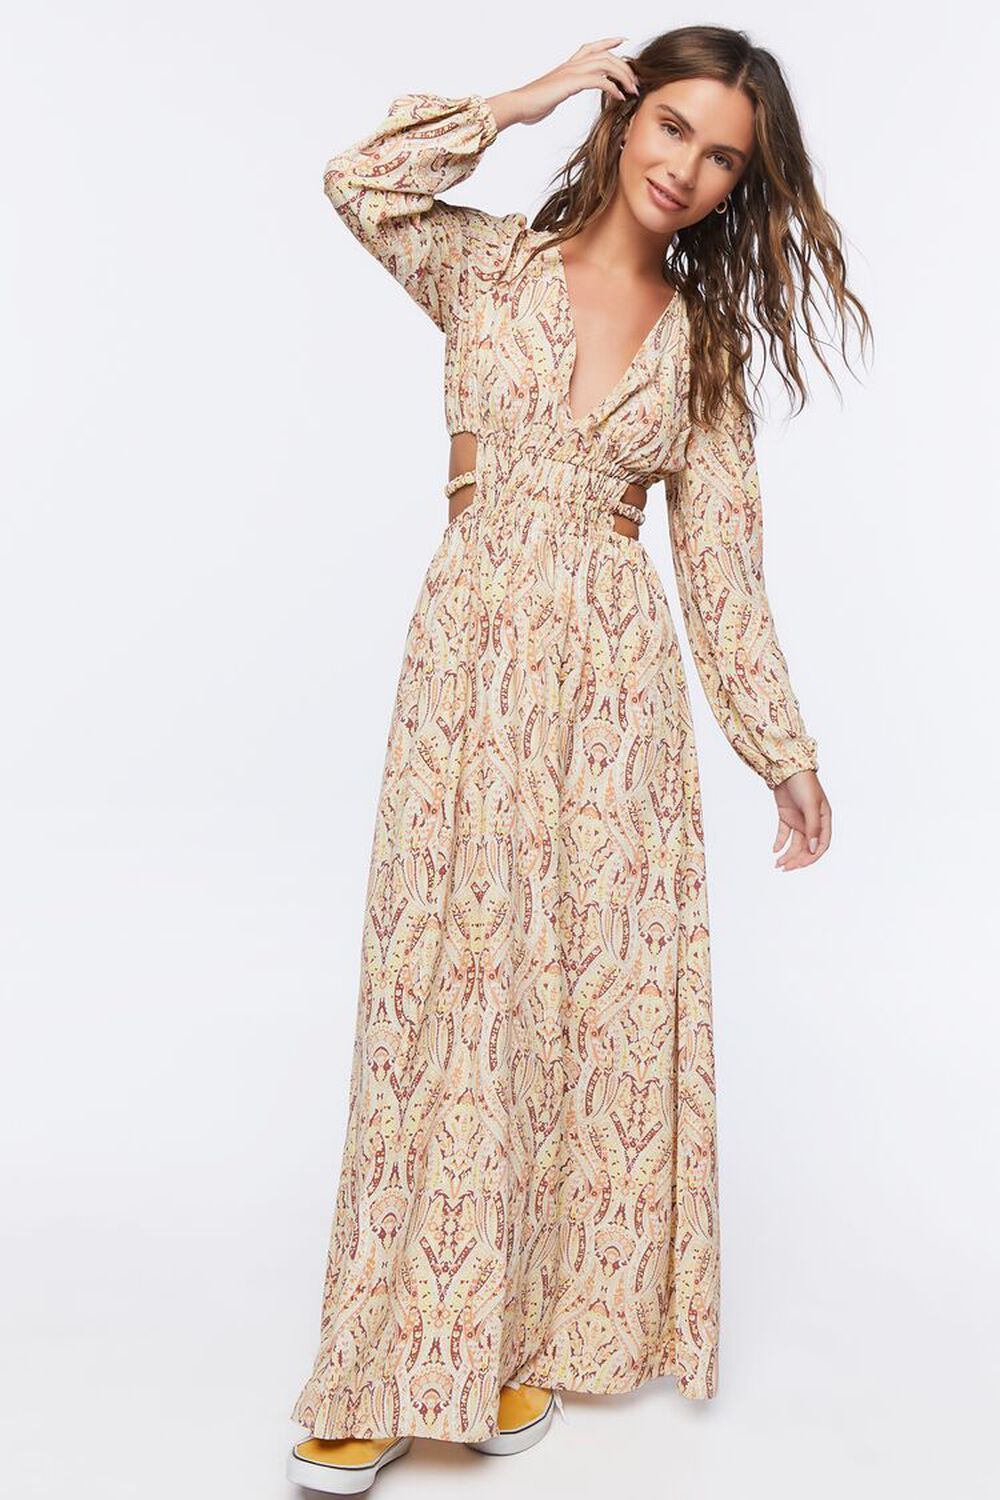 Paisley Print Cutout Maxi Dress | Forever 21 | Forever 21 (US)